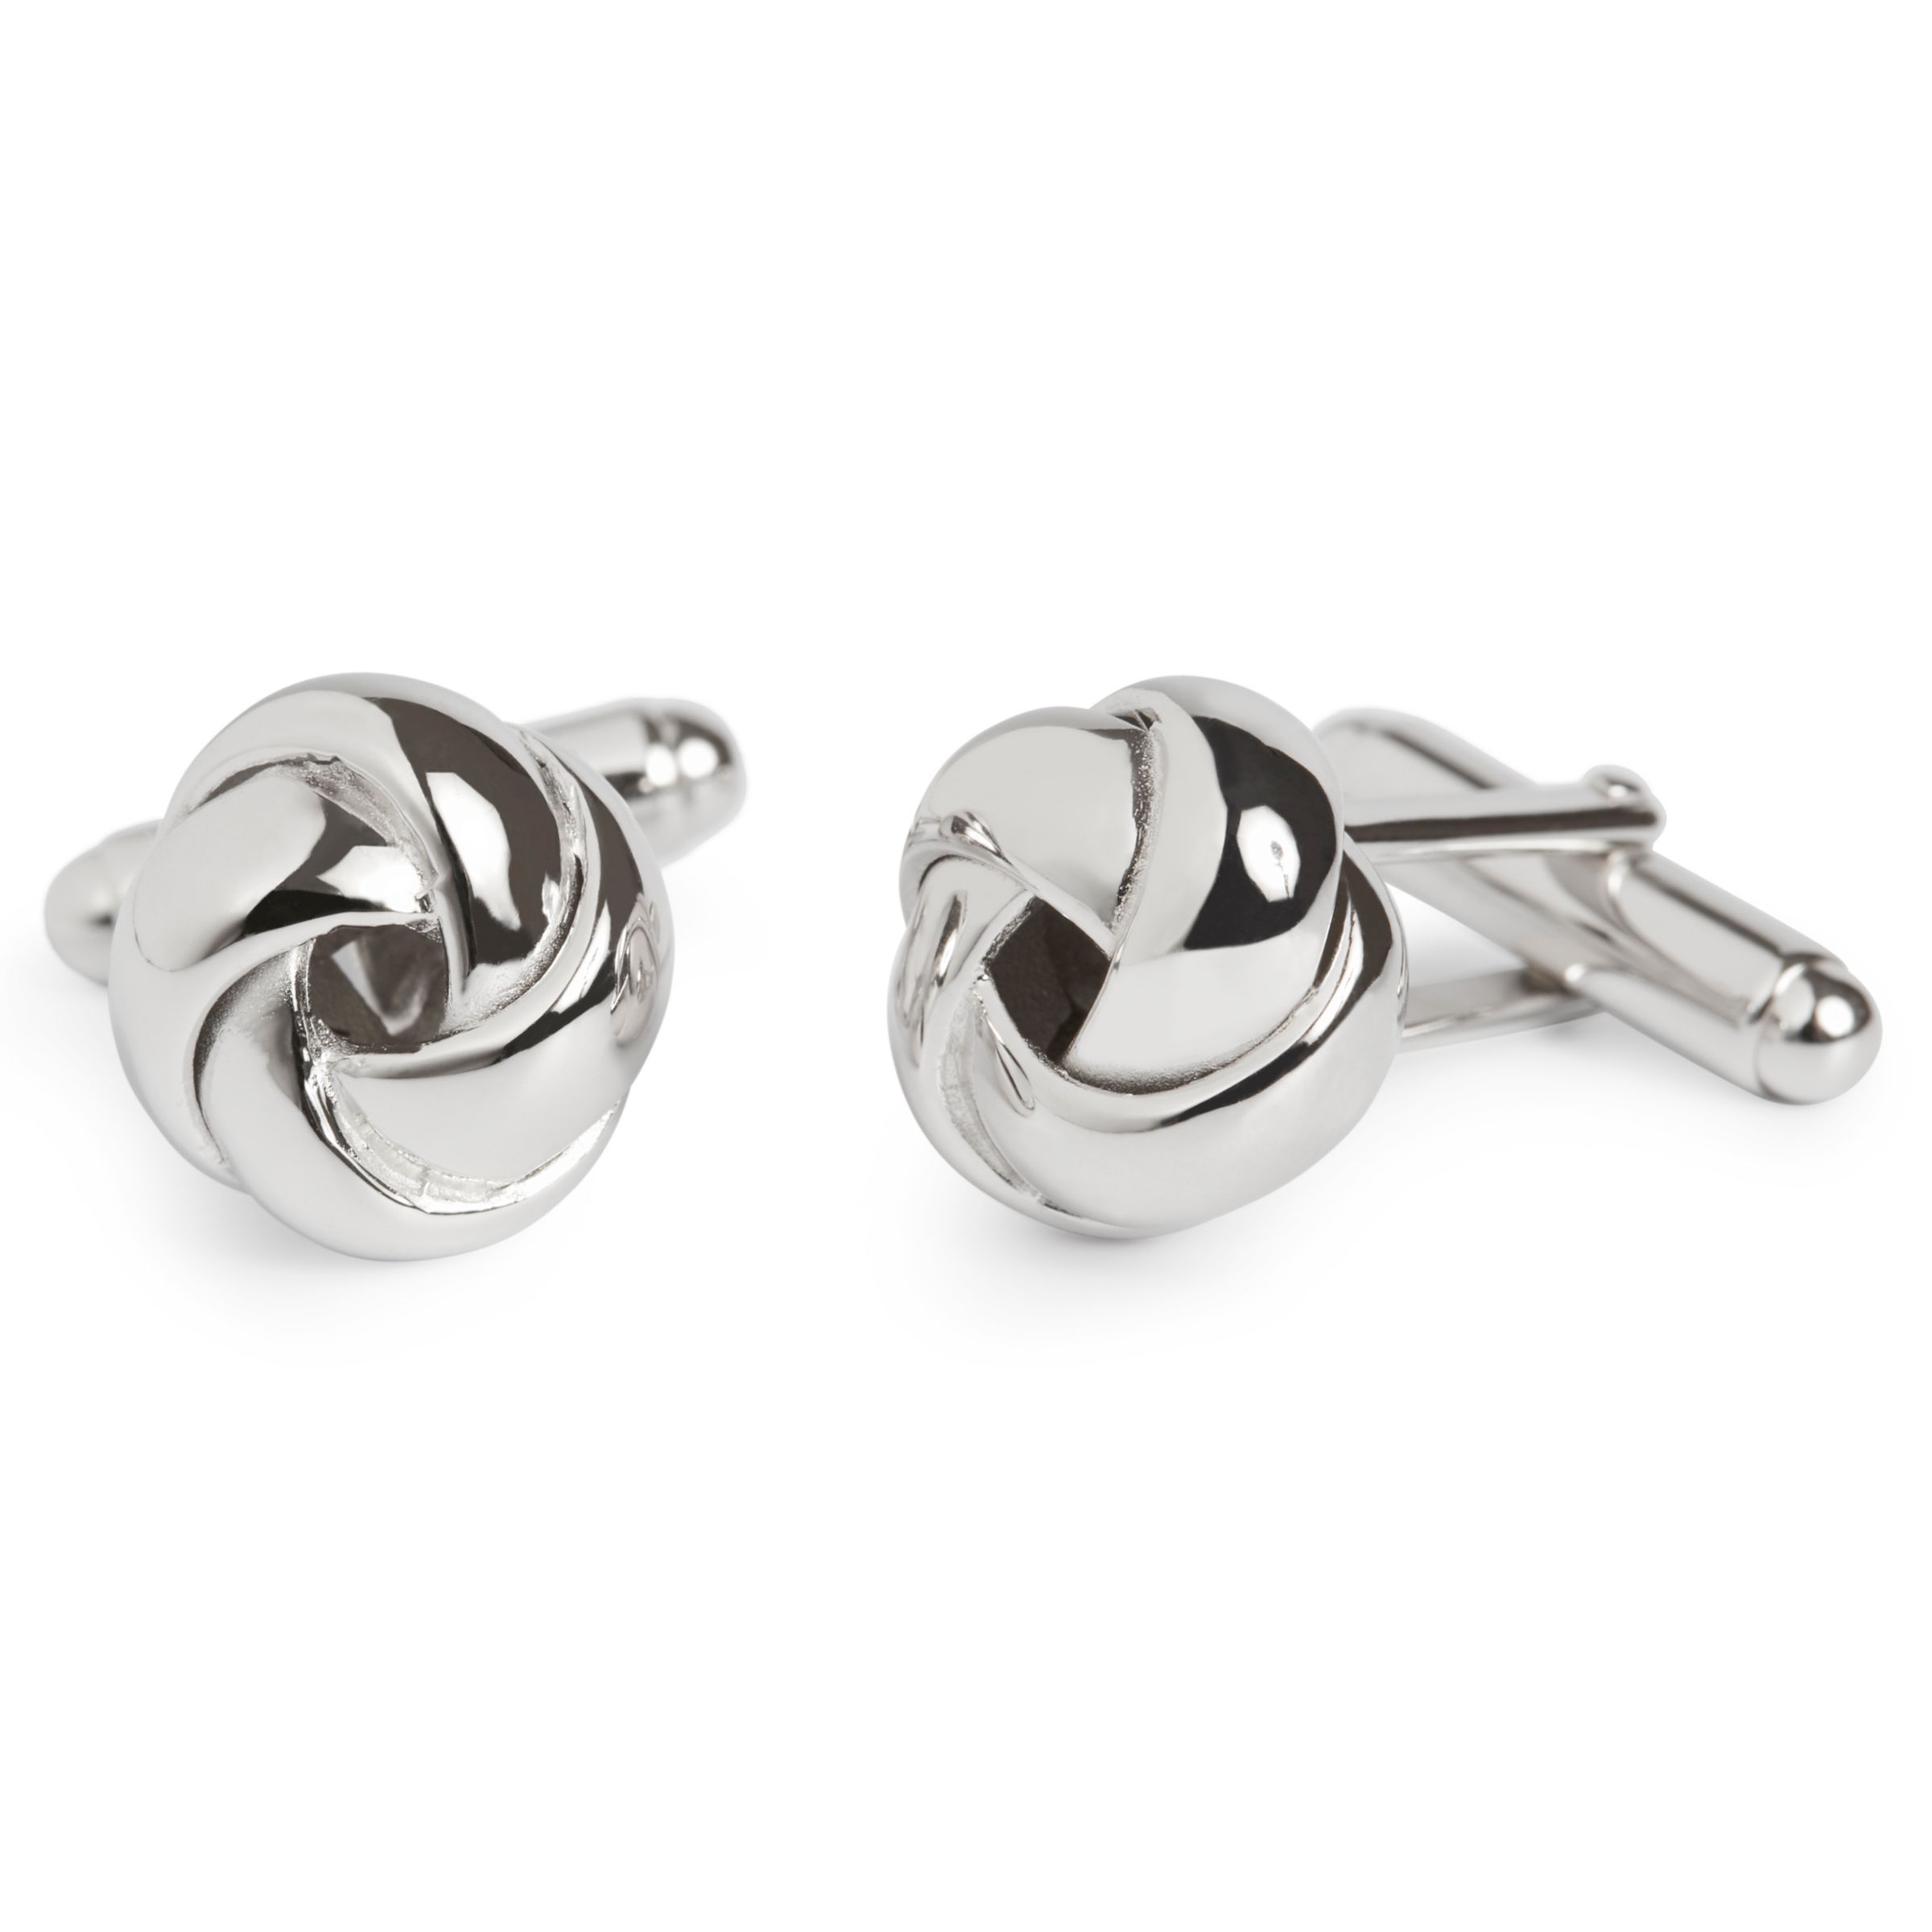 Simon Carter for John Lewis Sterling Silver Knot Cufflinks, Silver at ...